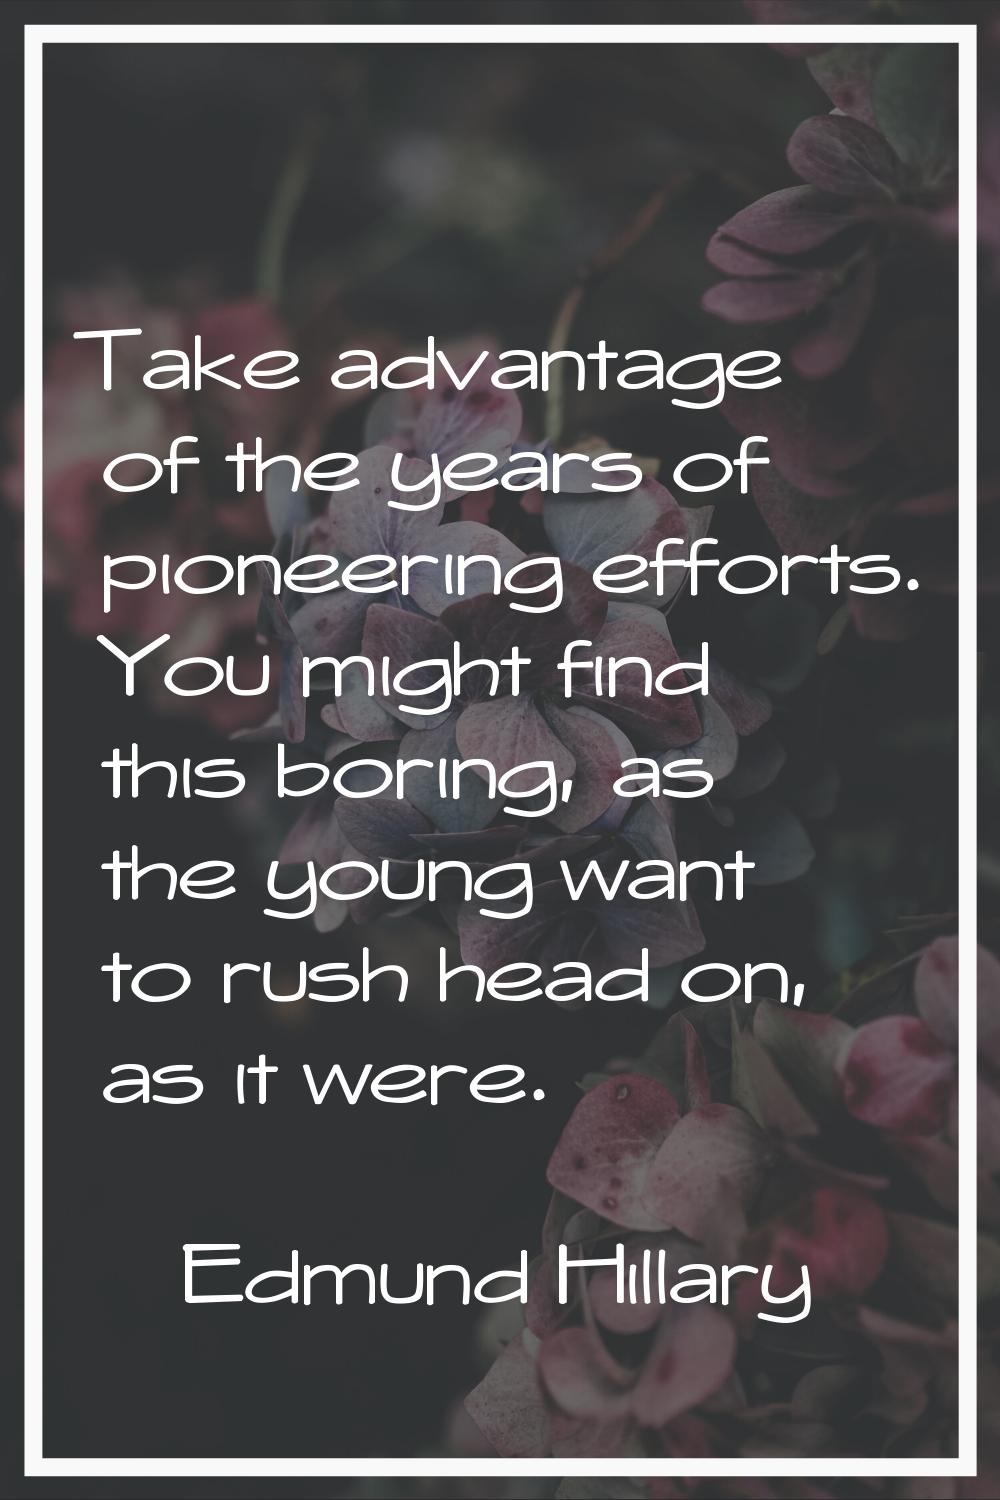 Take advantage of the years of pioneering efforts. You might find this boring, as the young want to